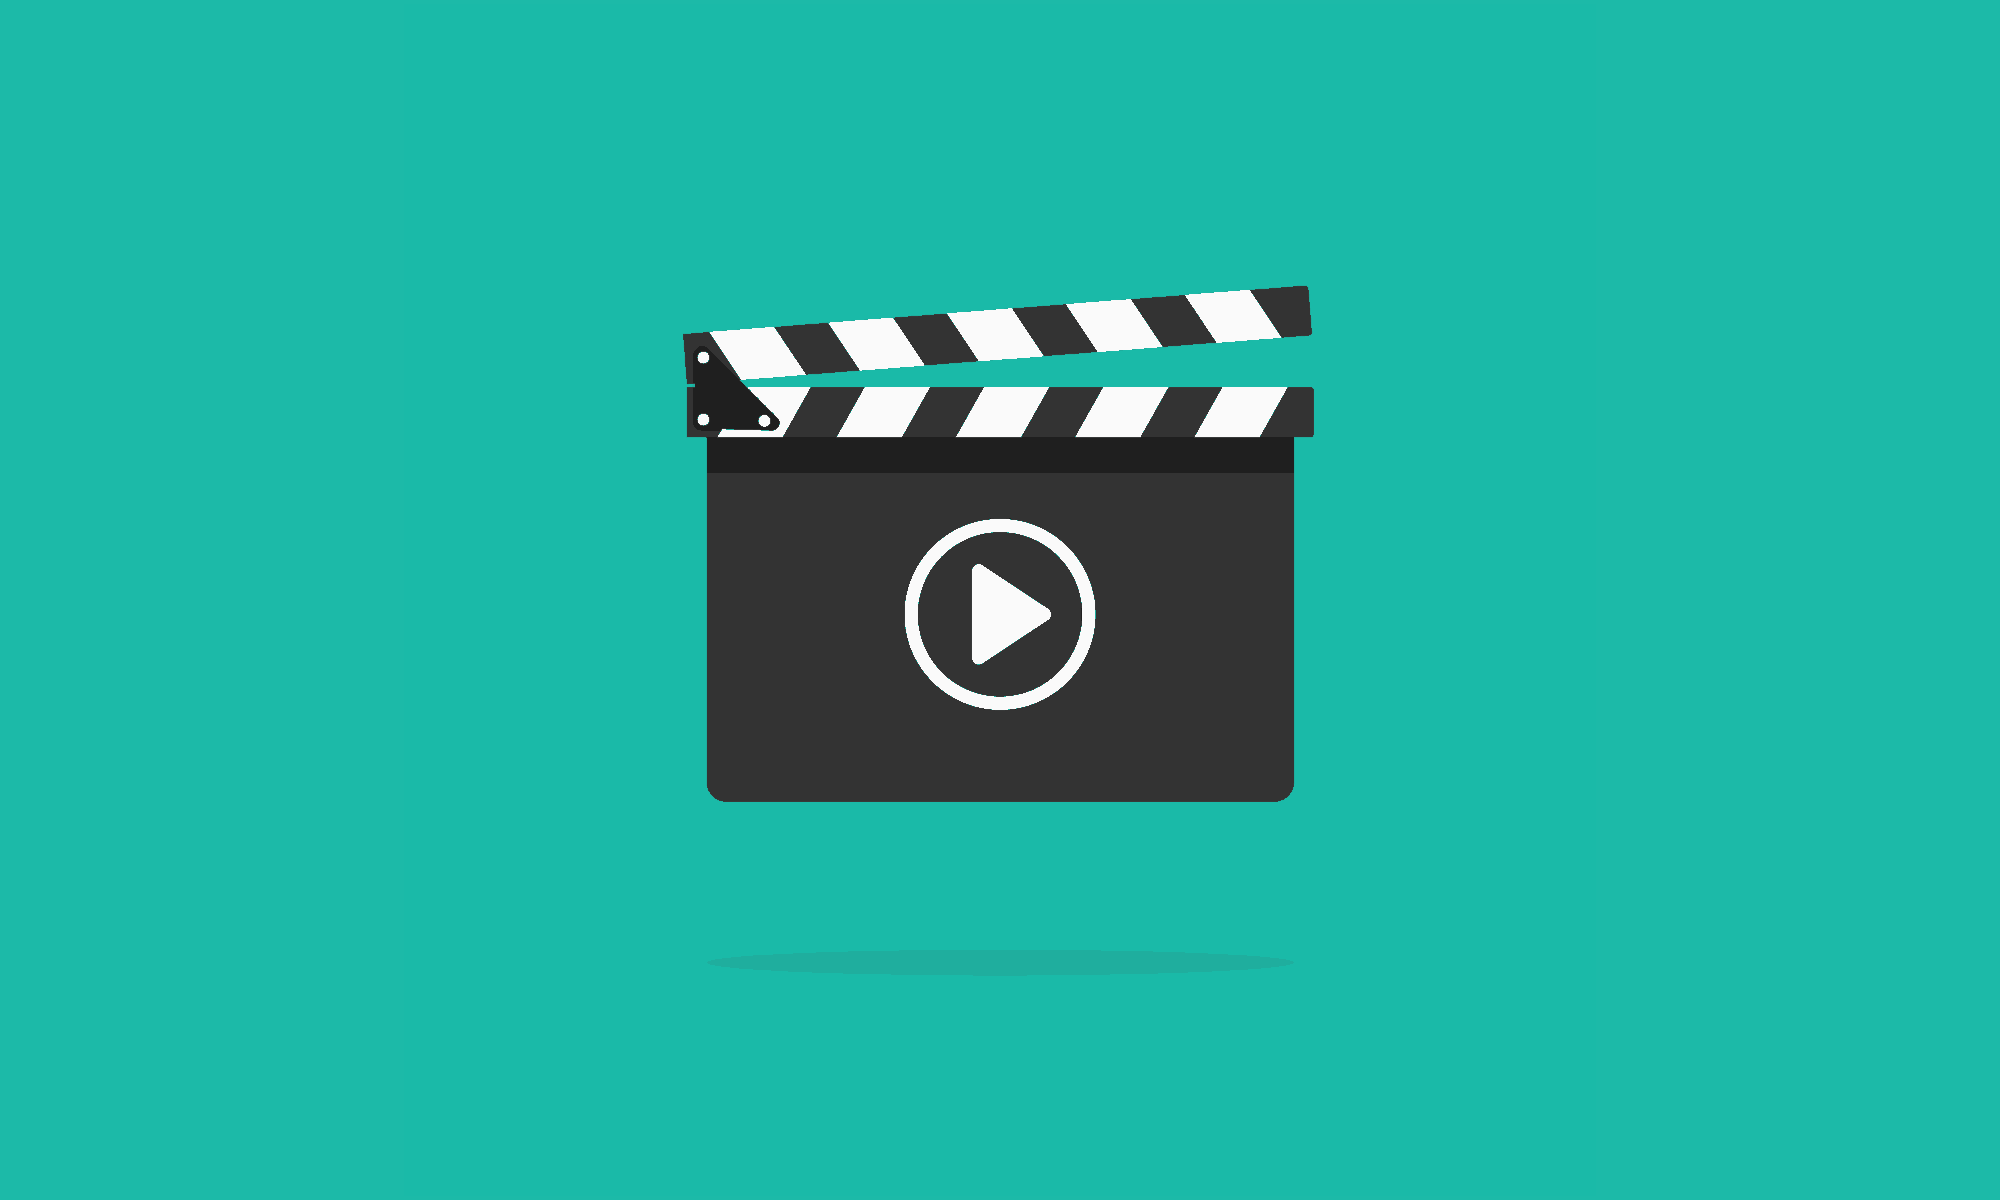 [Tools] Facebook Video Ads: 26 Practices For Driving Conversions